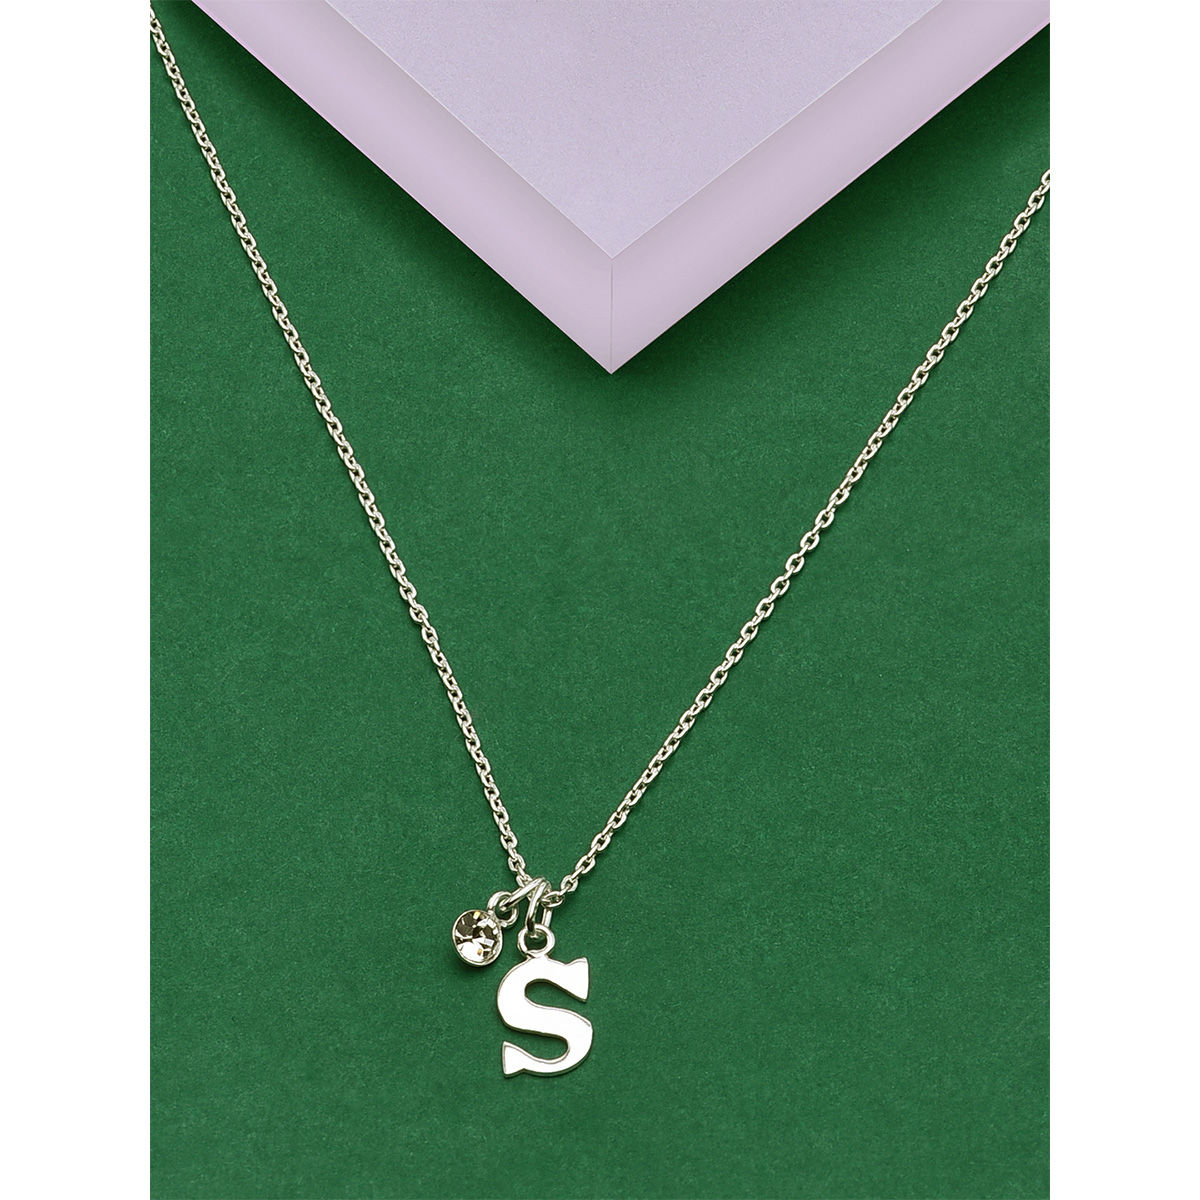 S Letter Necklace/ S Initial Chain Necklace/ Personalized Jewelry/ Necklace  Letter S/ Sliver Plated Letter S Initial Necklace/ S Alphabet - Etsy